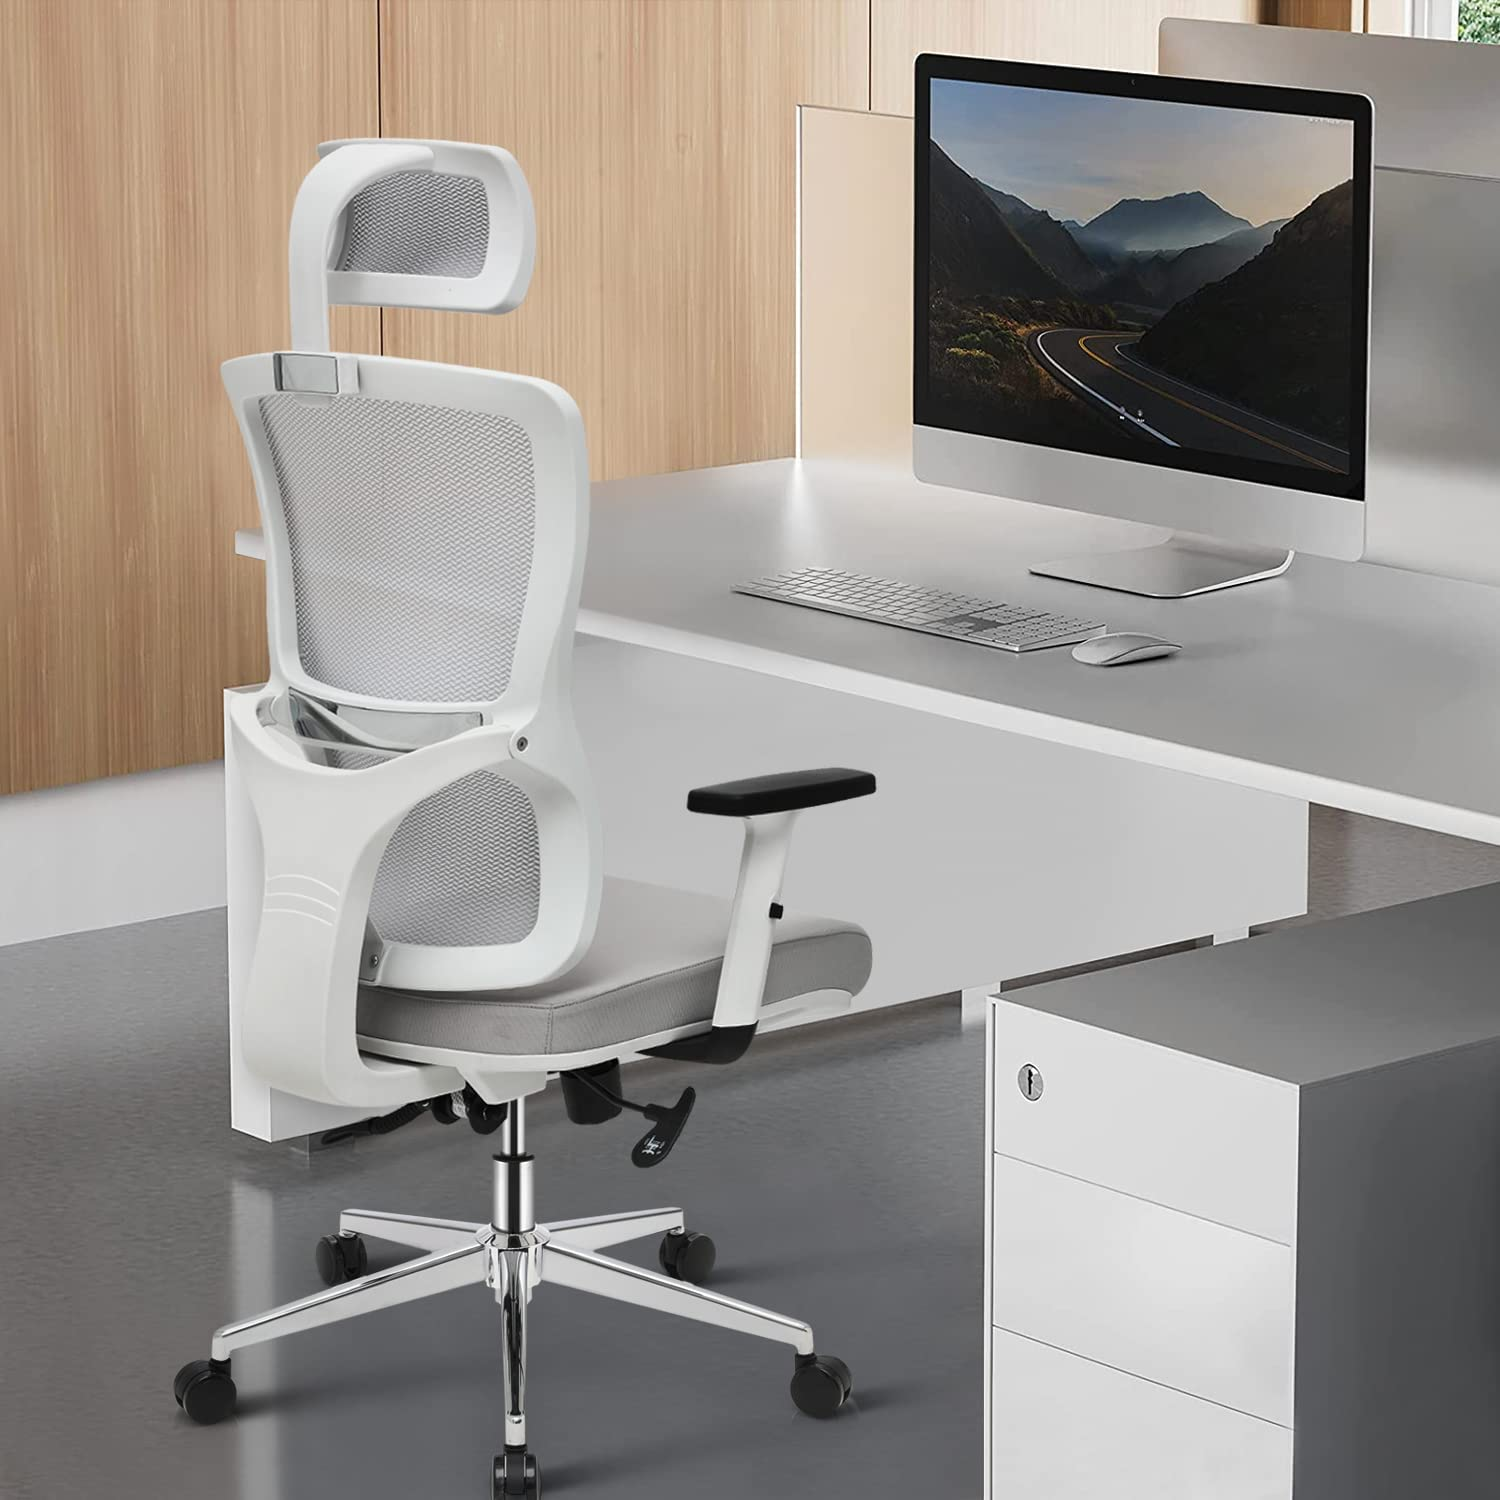 https://www.wyida.com/ergonomic-black-and-white-office-room-swivel-computer-desk-chair-for-office-product/